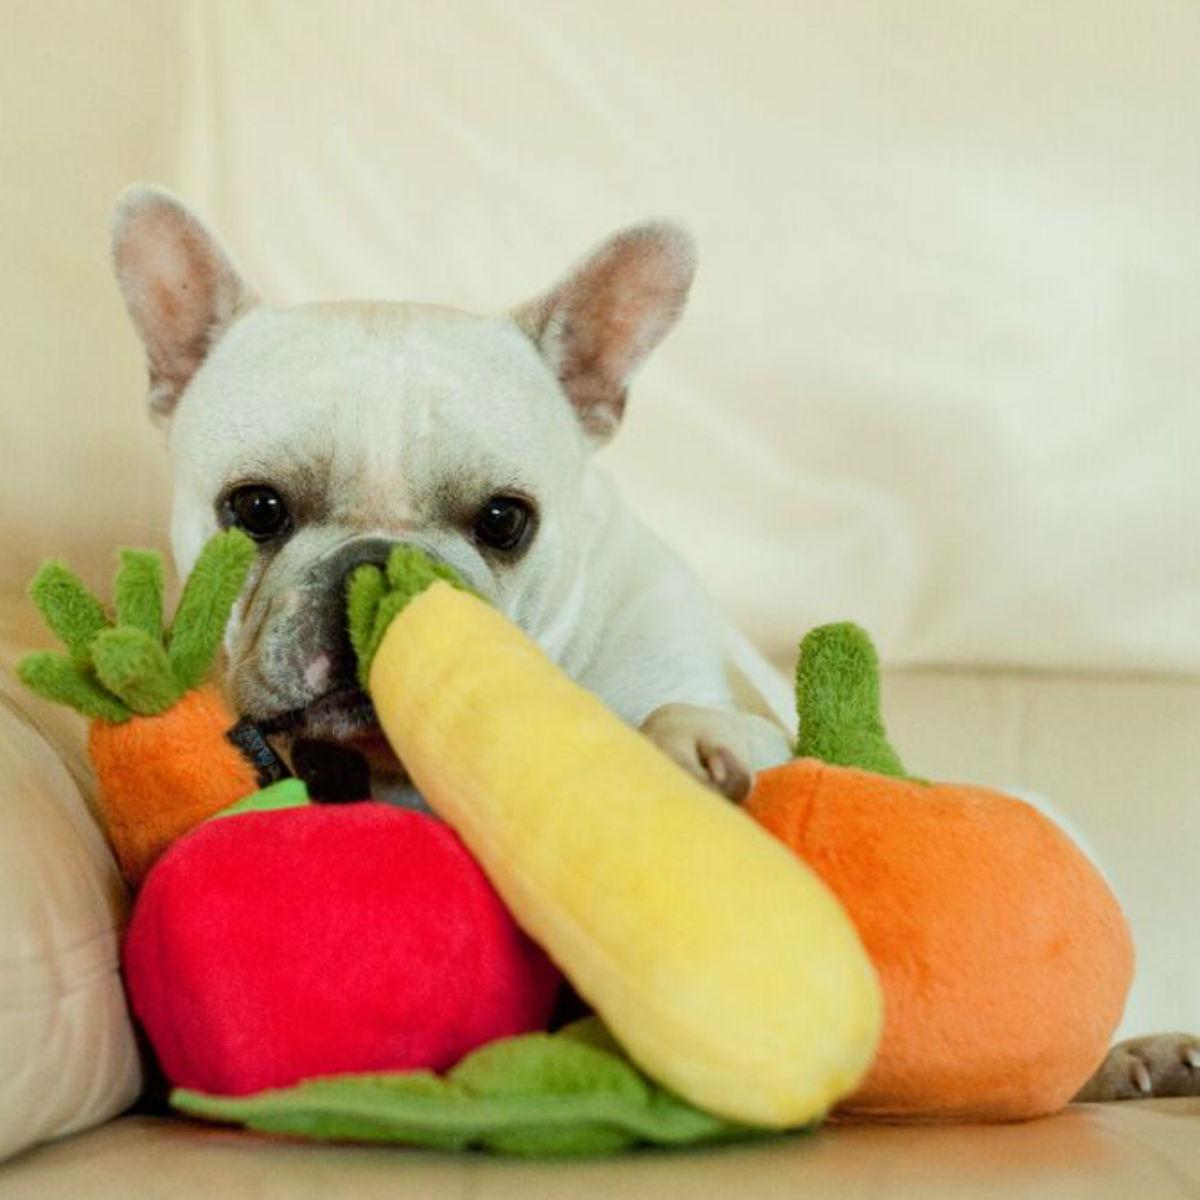 https://images.baxterboo.com/global/images/products/large/plays-garden-fresh-dog-toy-collection-7723.jpg